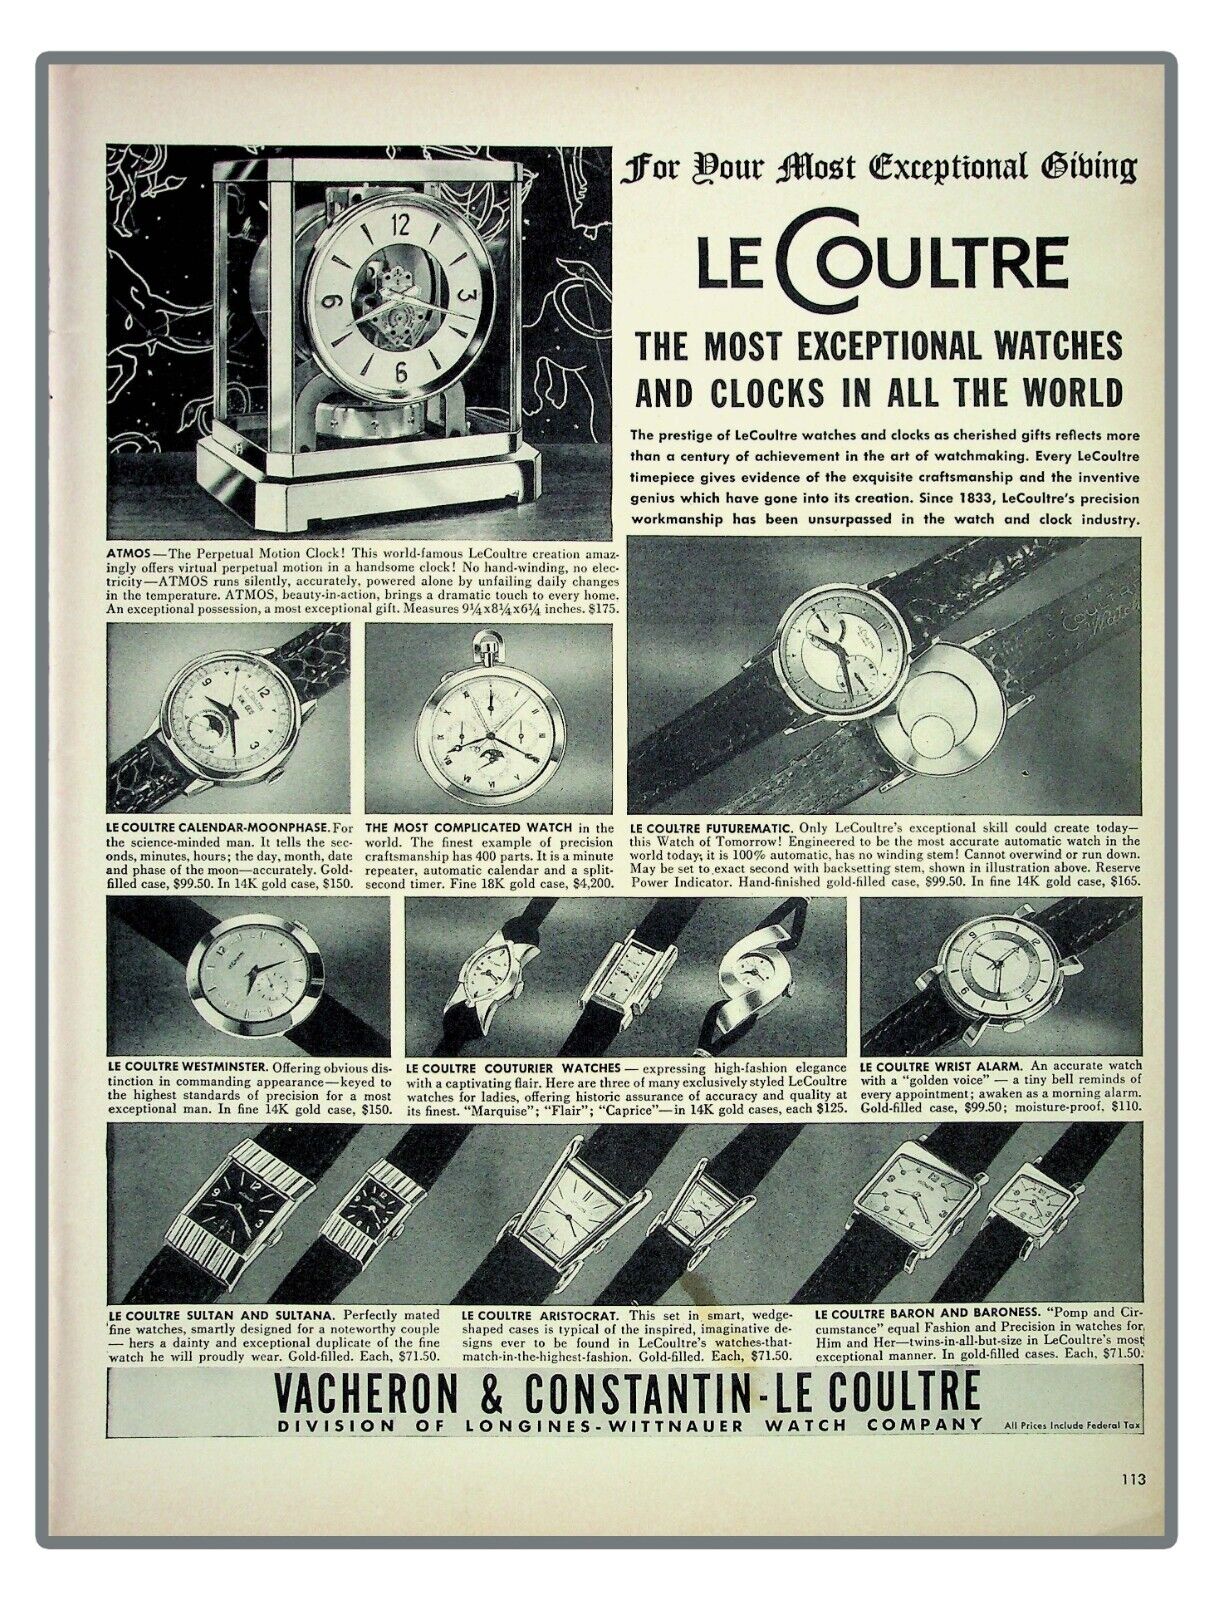 Le Coultre Most Exceptional Watch & Clocks  All The World 1952 Vintage Print Ad